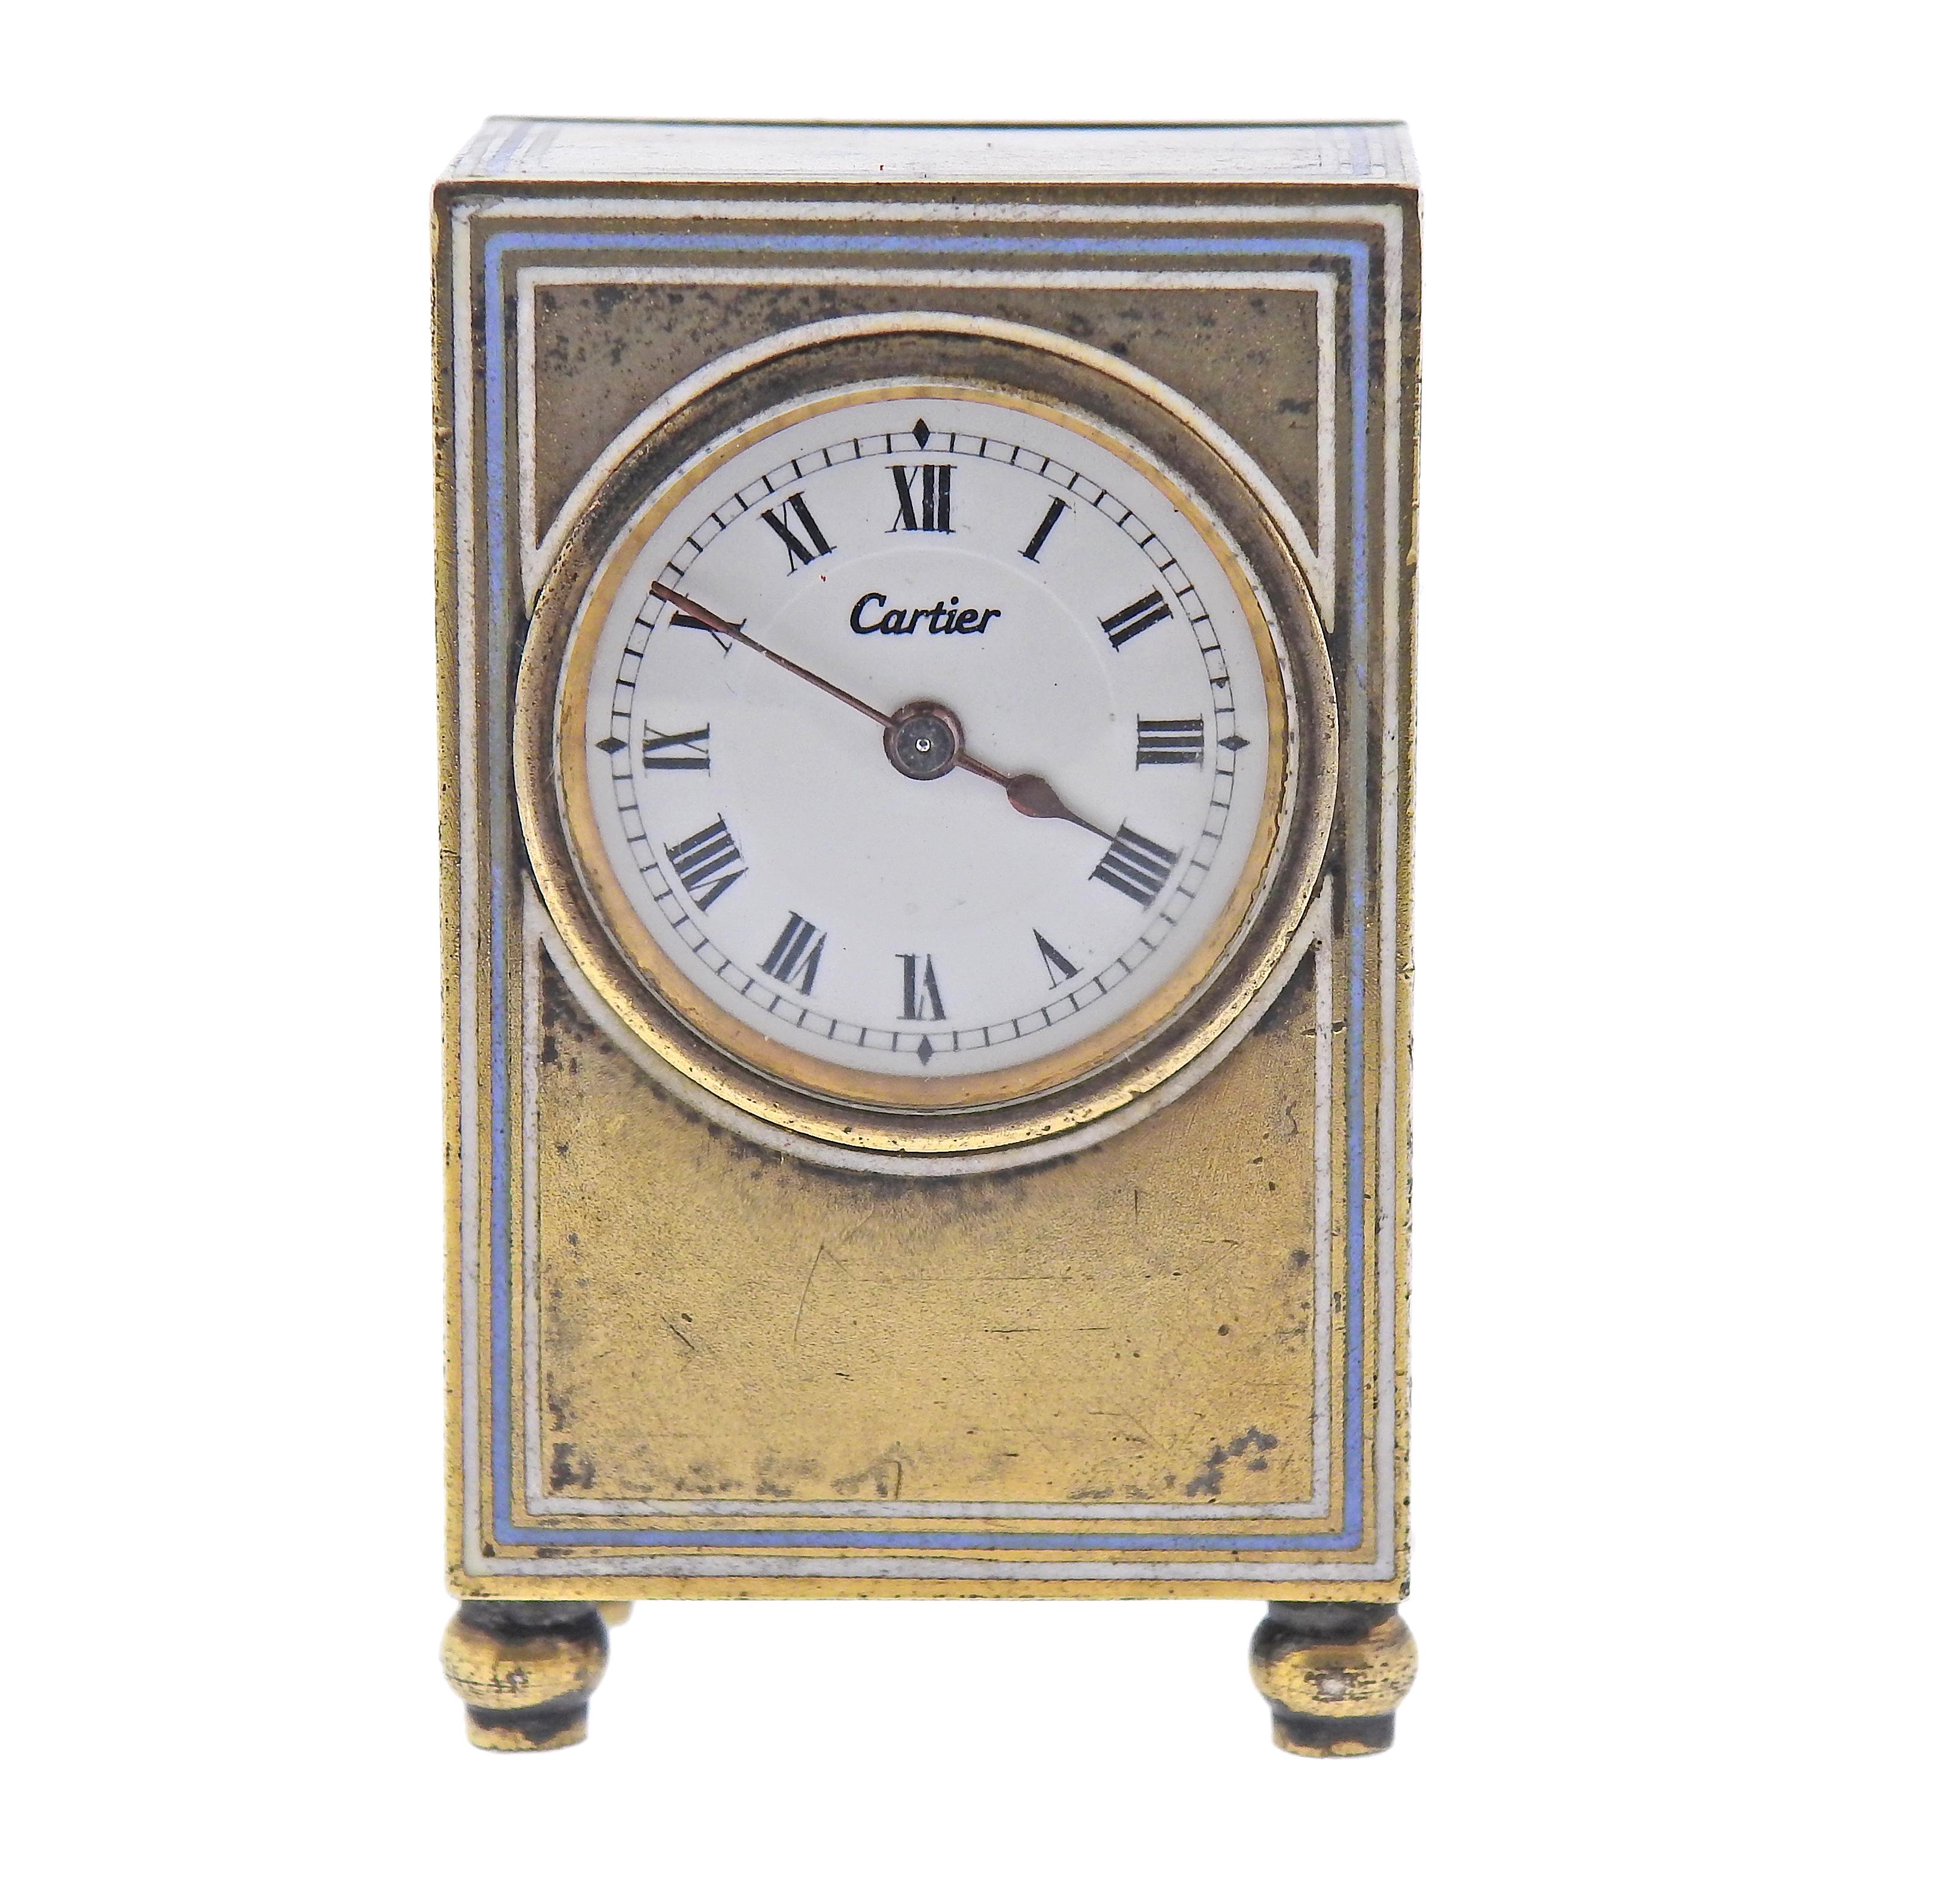 Antique Cartier sterling silver desk/travel clock with original key winder and box. Clock measures 1.75